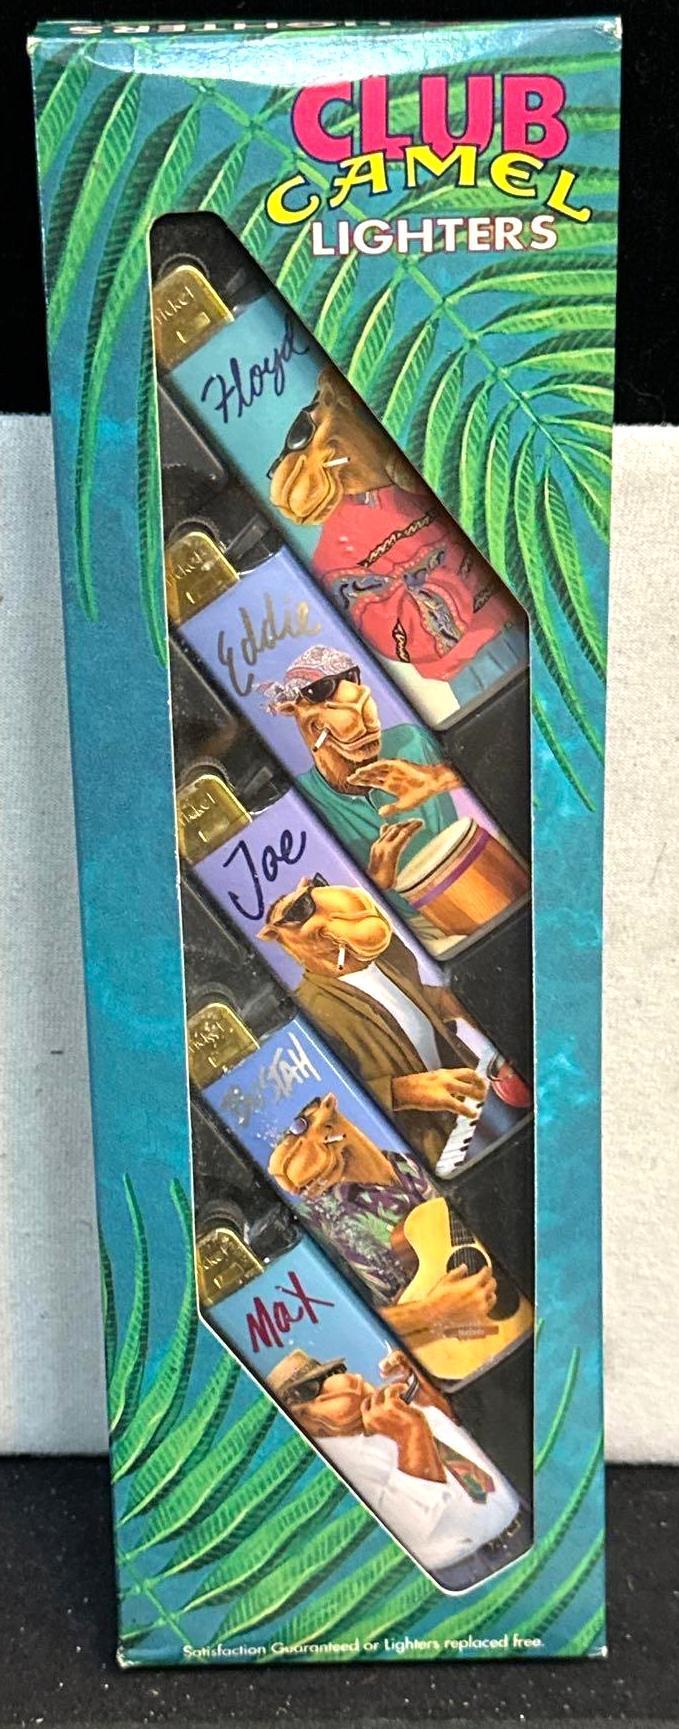 Set of 5 Club Camel Lighters unused in Original Box from 1992